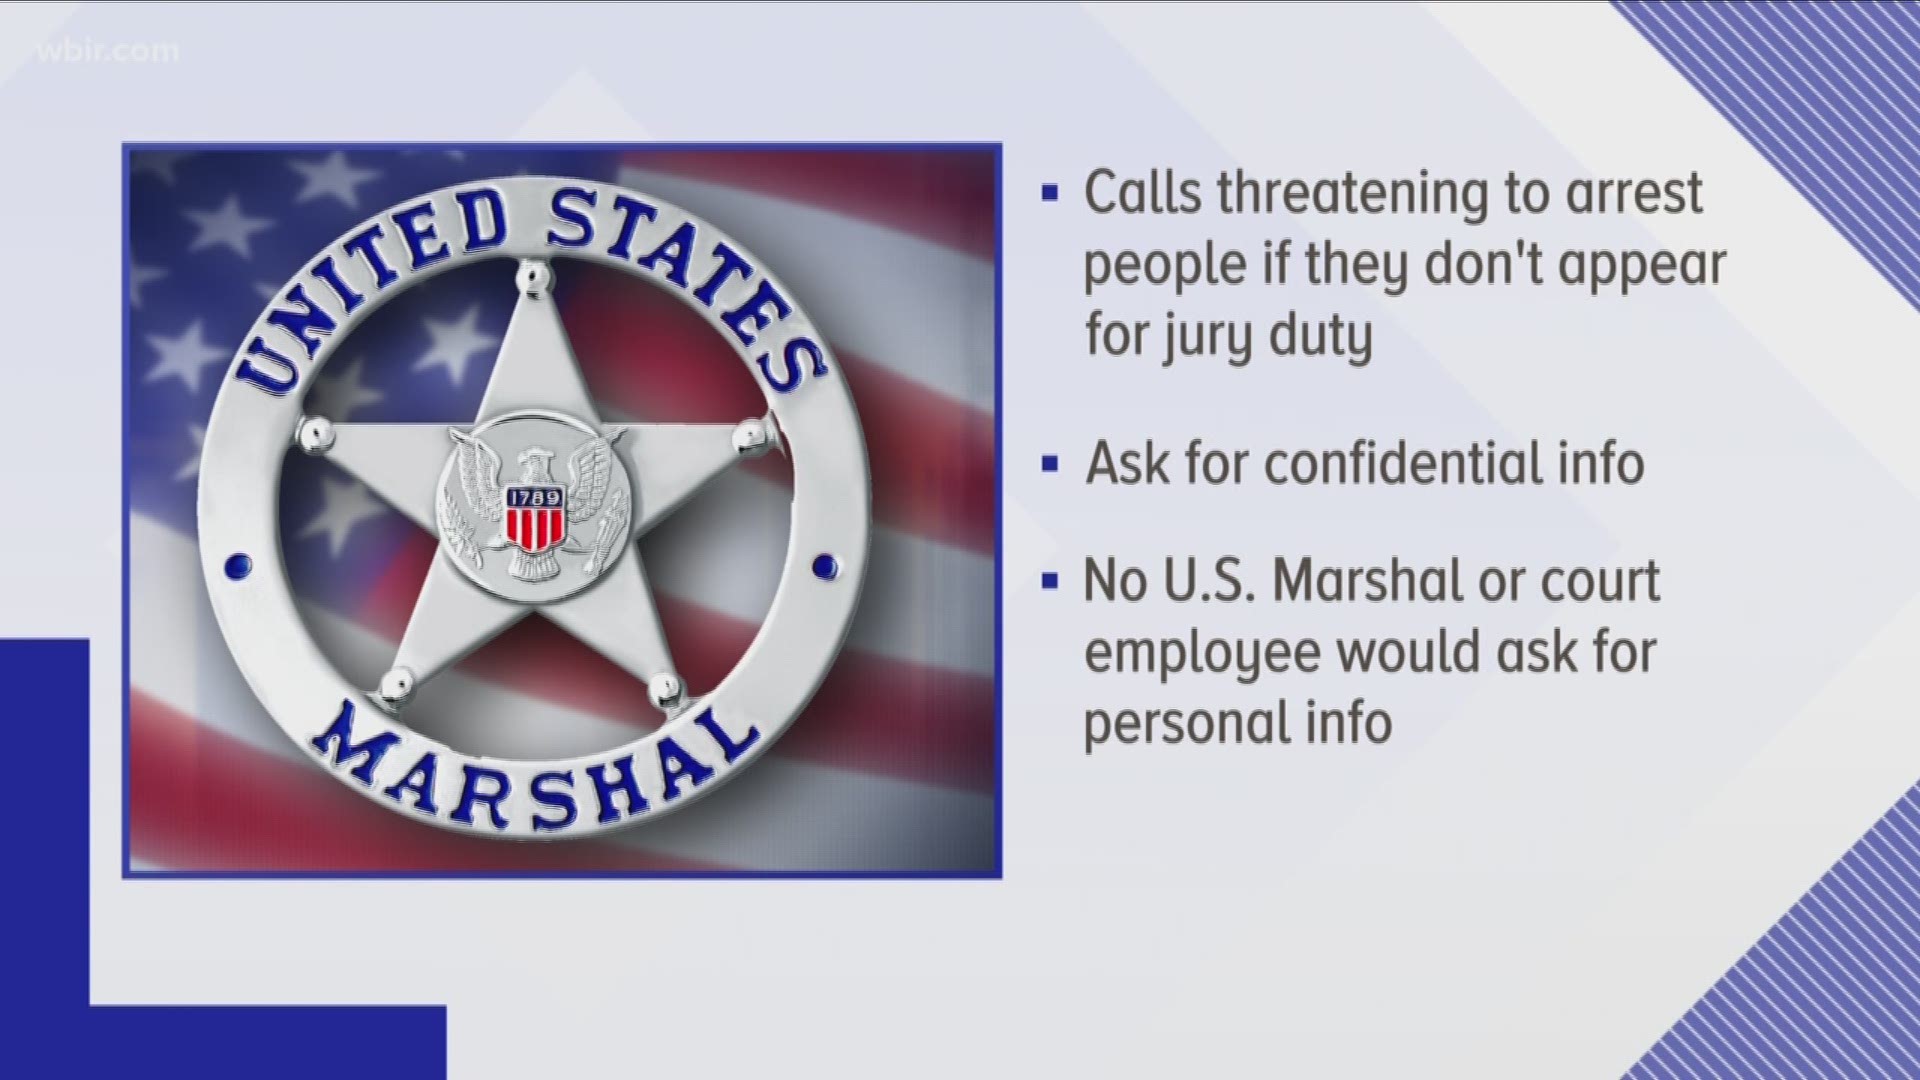 The U.S. Marshals service says scammers are calling people and threatening to arrest them if they fail to appear for jury duty.